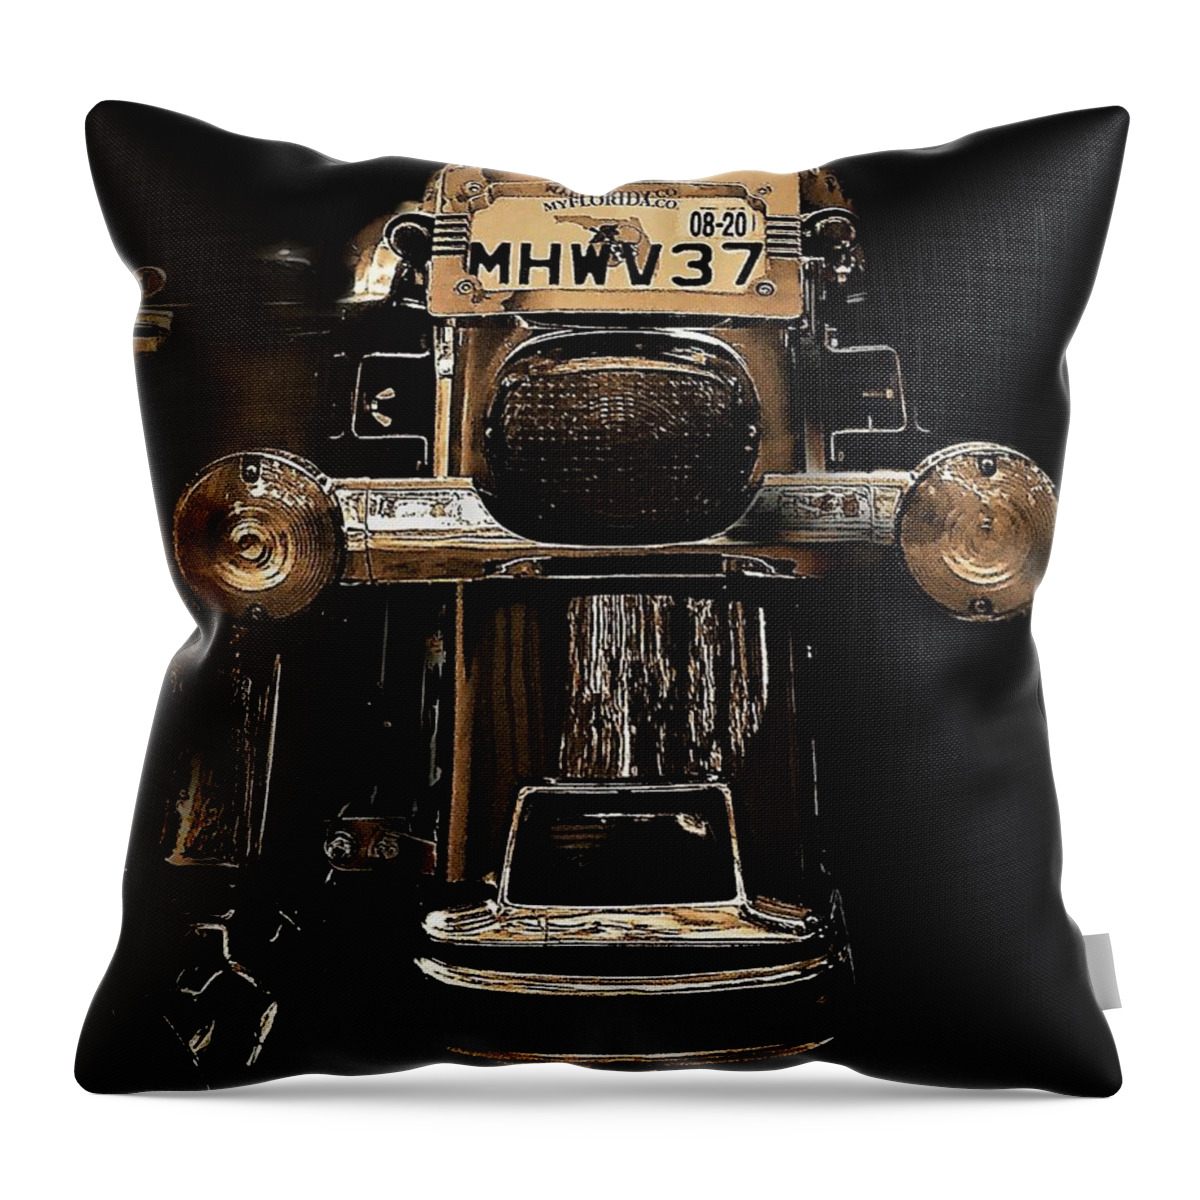 Harley Davidson Throw Pillow featuring the photograph Rock On by John Anderson